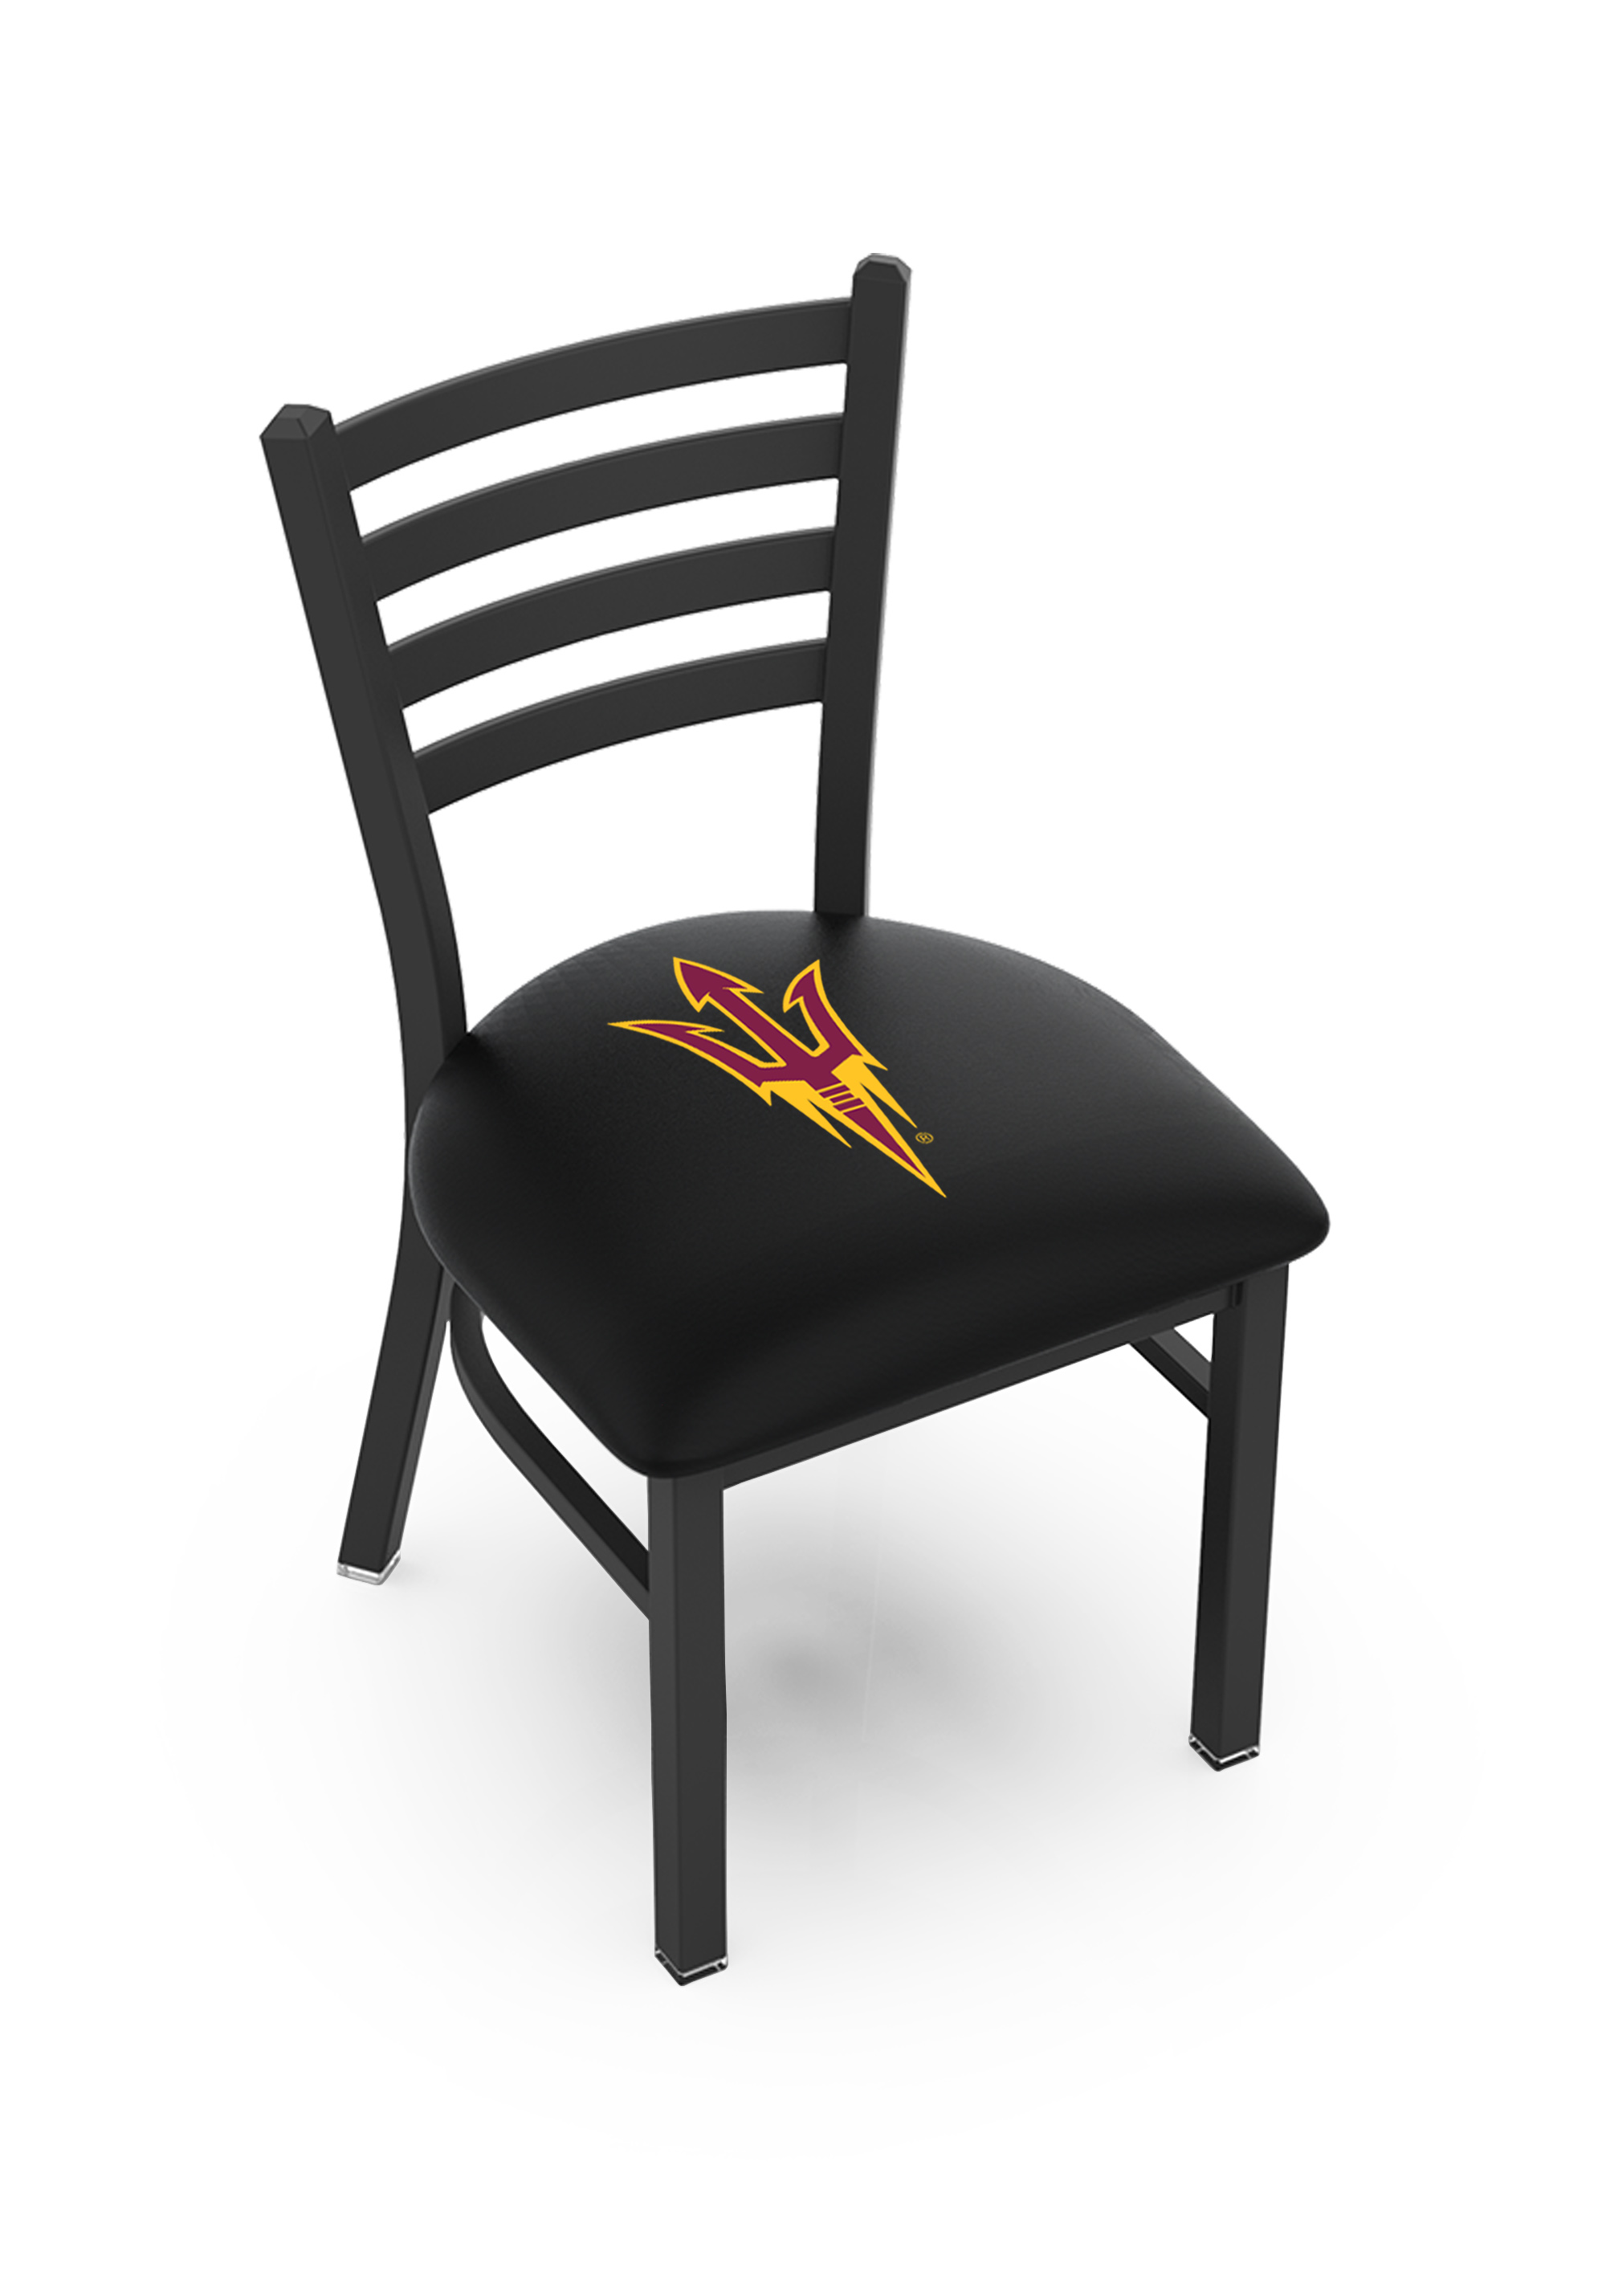 Picture of Holland Bar Stool L00418ArizSt-F 18 in. Arizona State Chair with Sun Devils Pitchfork Logo